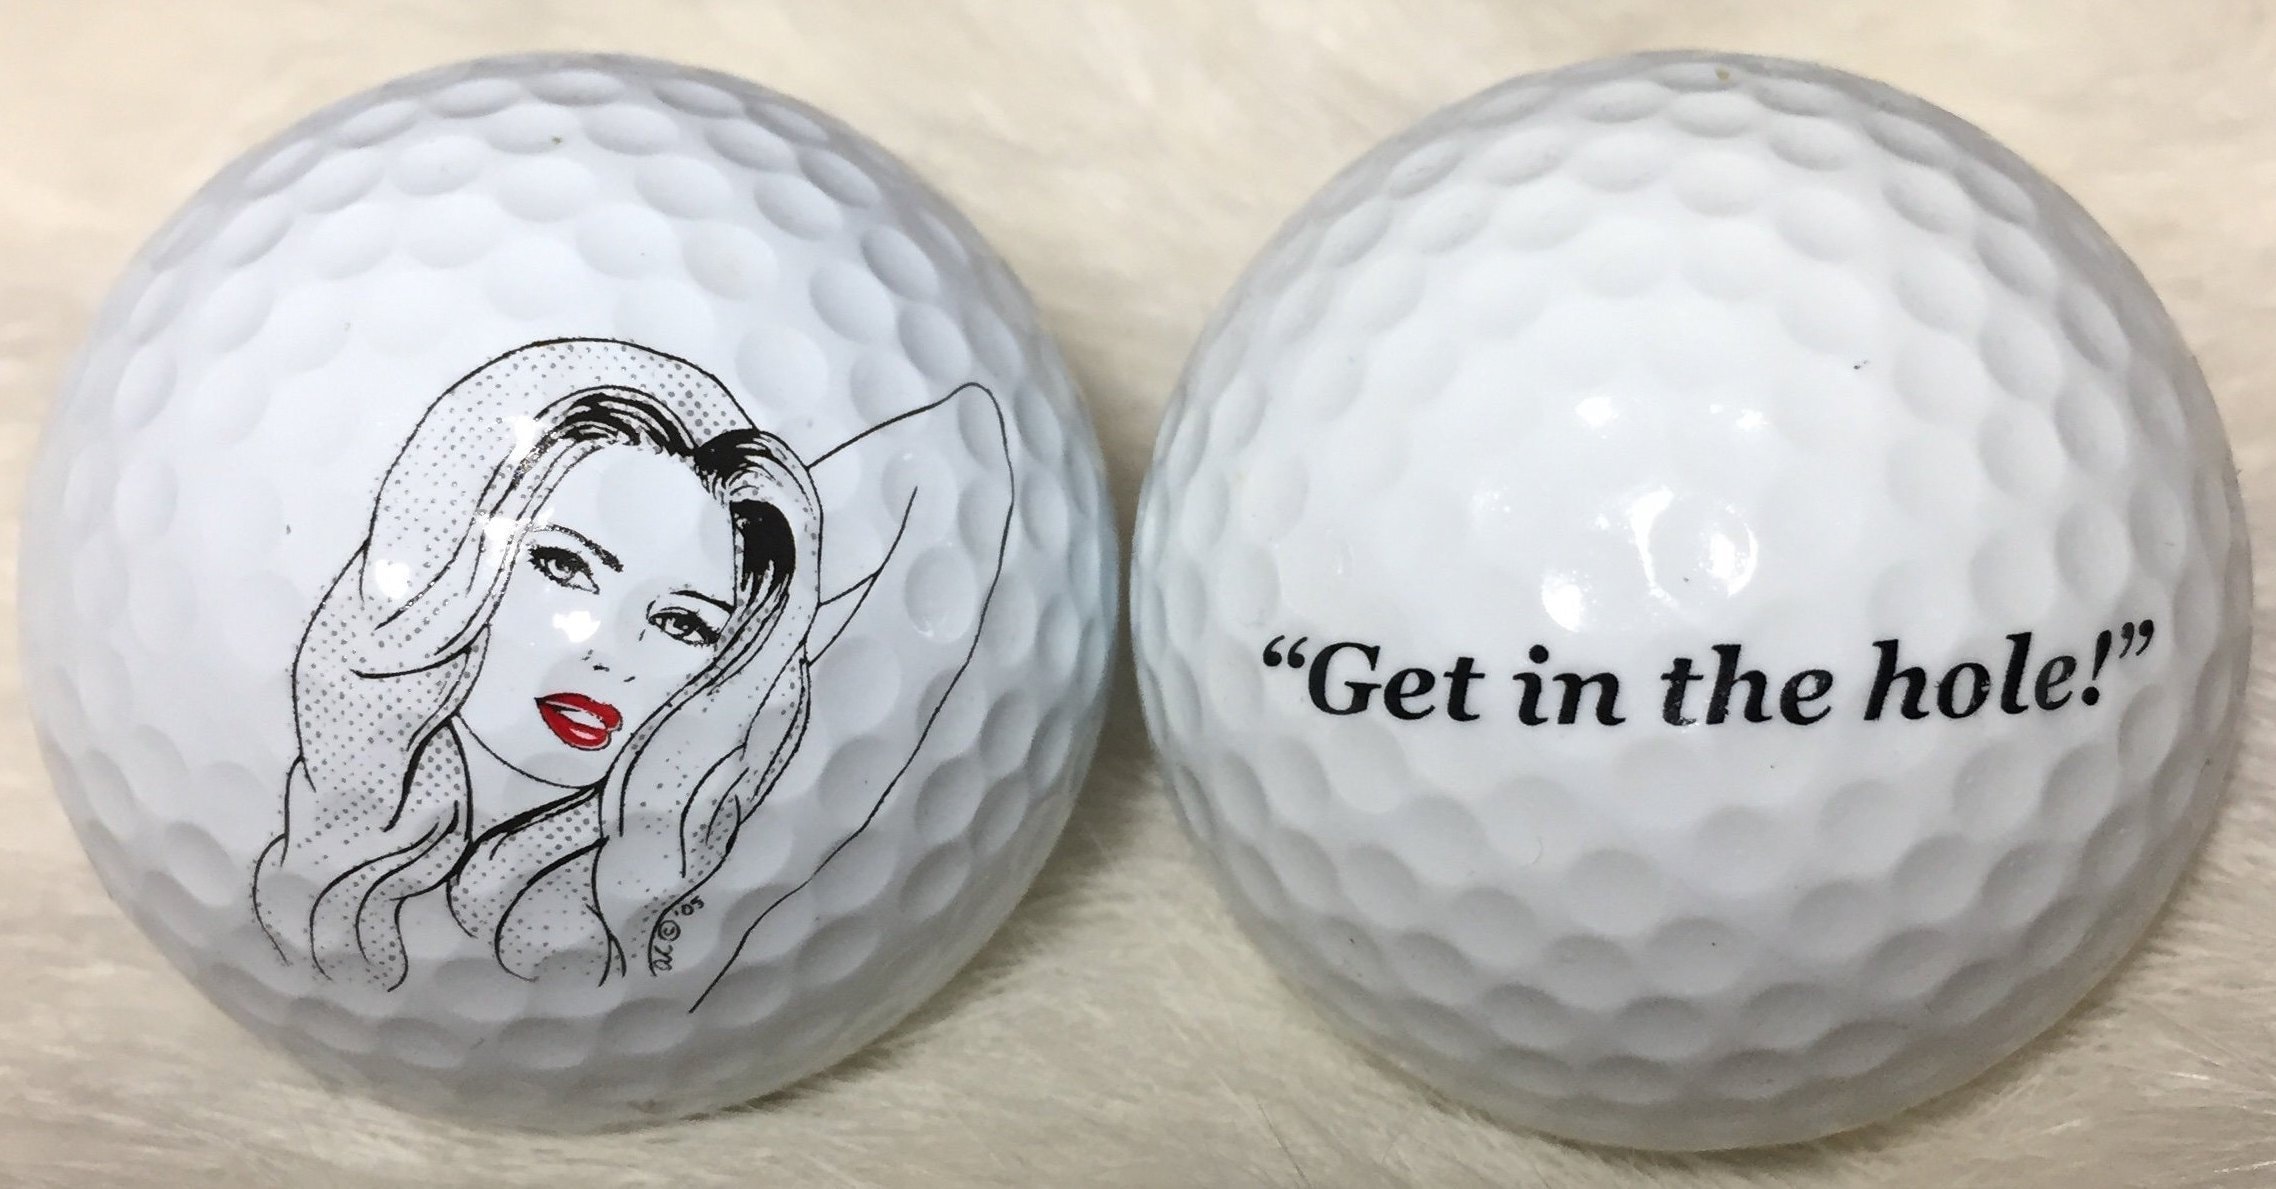 CybGene Funny Golf Gifts Set for Men & Women, Golf Balls Set for Golf  Lovers, Perfect for Golf Lovers The Queen of The Green